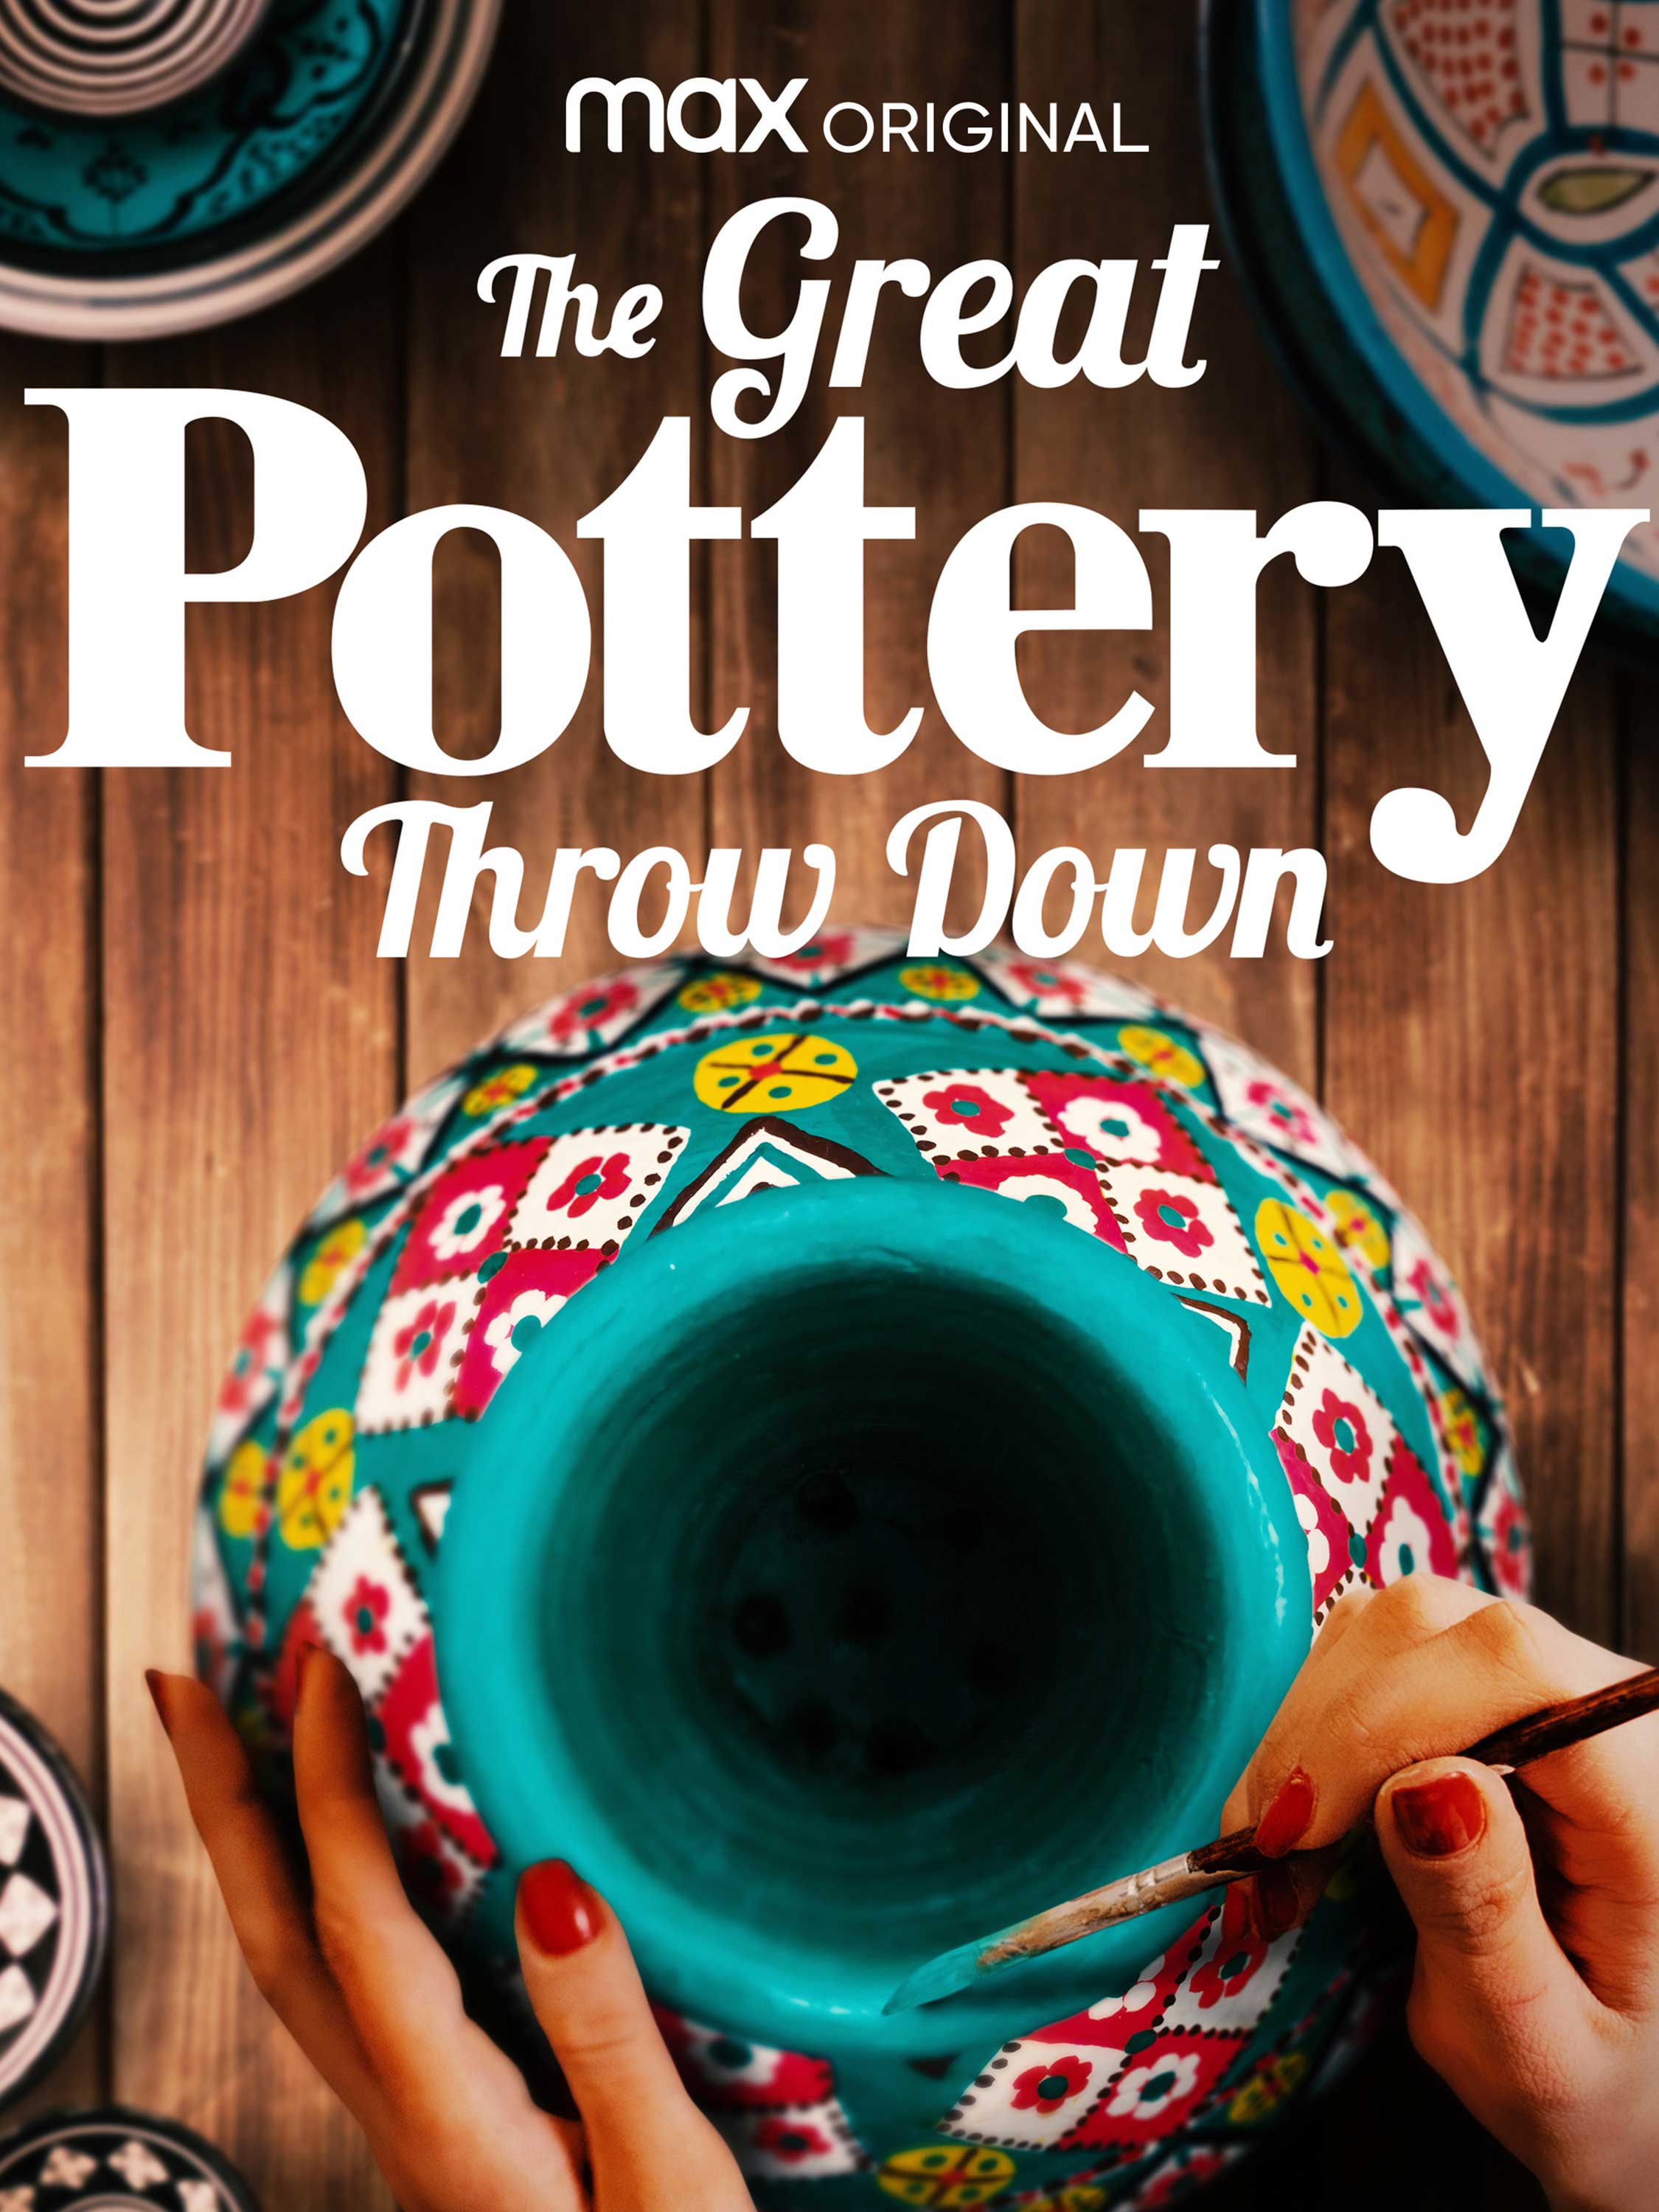 The Great Pottery Throw Down.